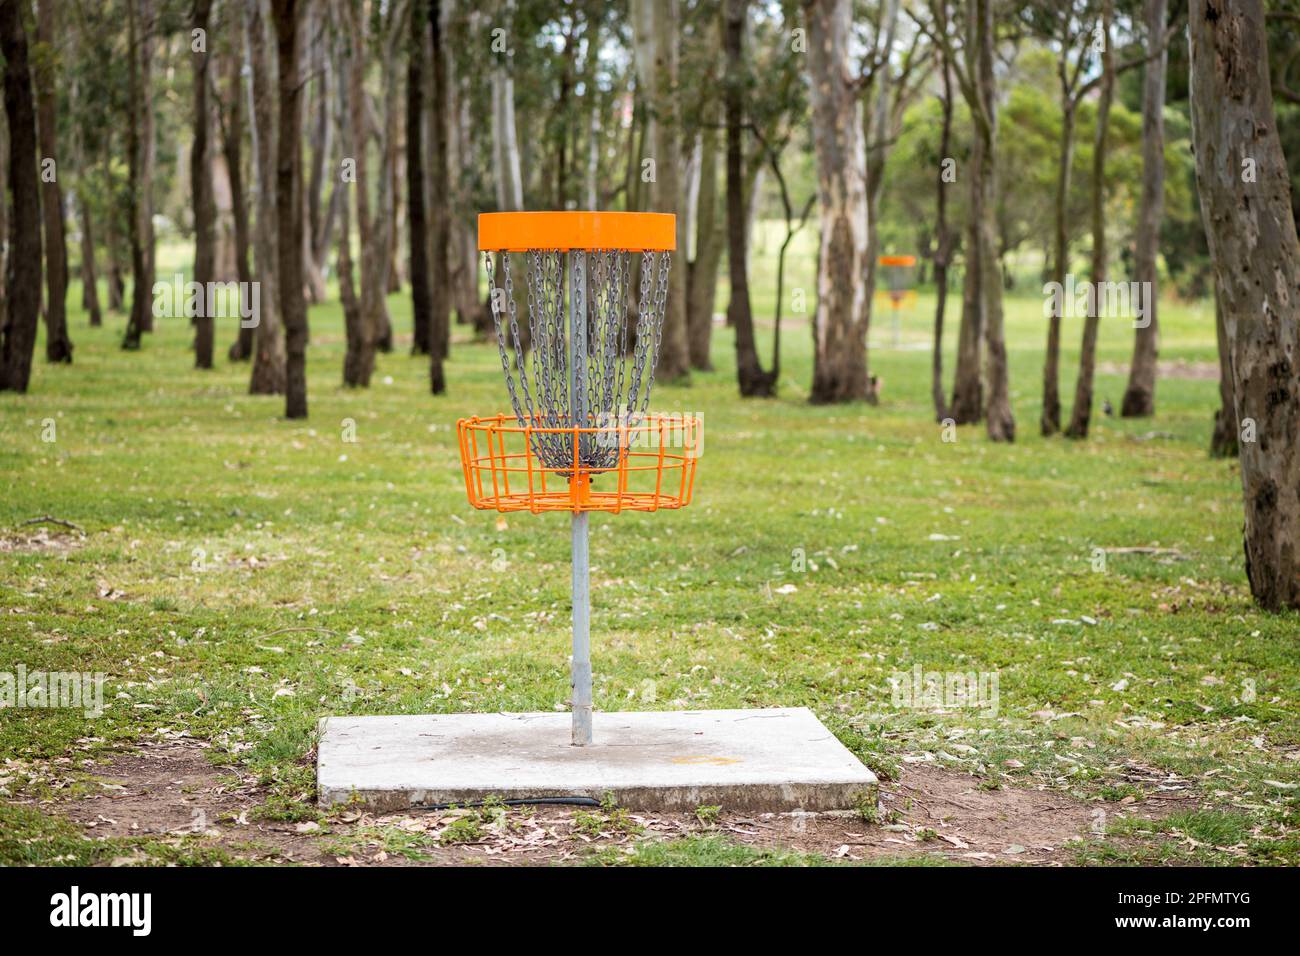 Disc golf (frolf) basket in a park obstacle course with a shallow depth of field Stock Photo